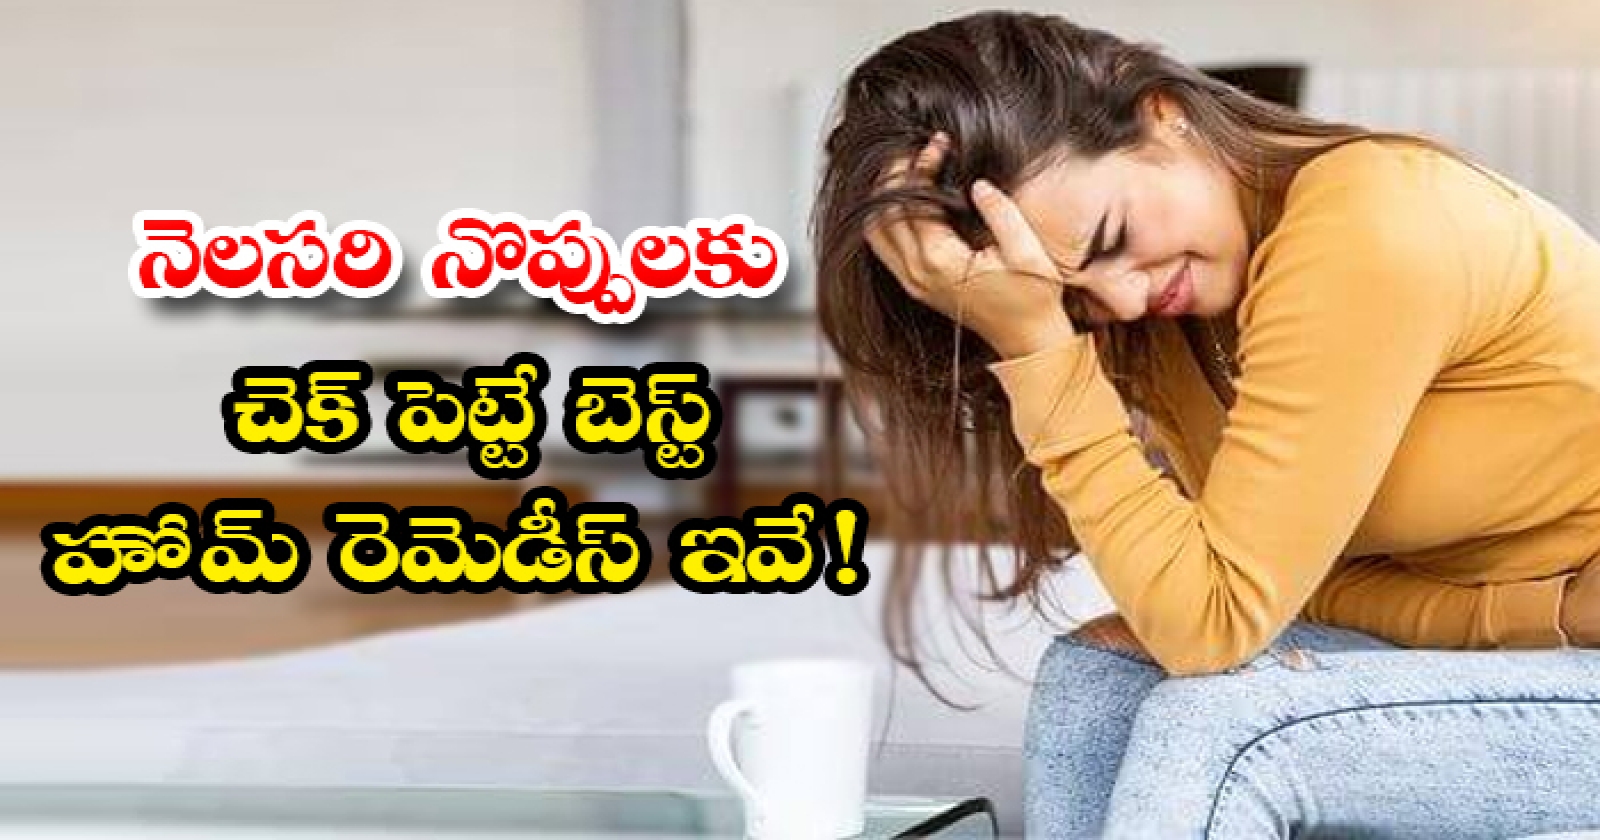  Home Remedies For Getting Rid Of Period Pains! Home Remedies, Period Cramps, Menstrual Cramps, Pains, Latest News, Period Pains, Health, Good Health, Health Tips, Women, Periods, Ginger, Butter Milk, Lemon, Fruits-TeluguStop.com